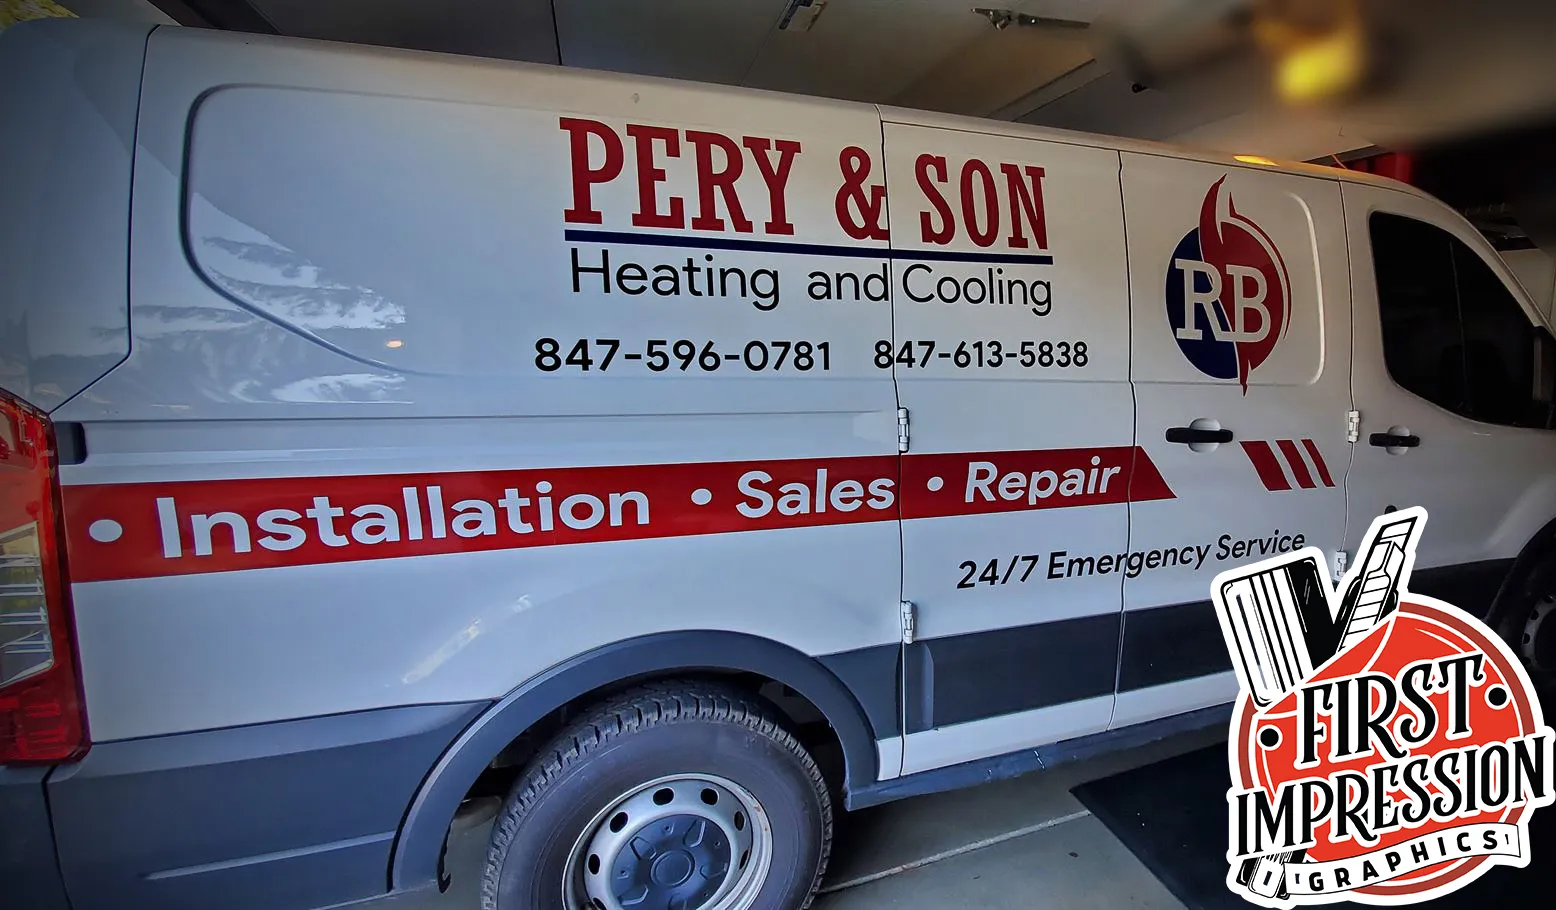 Pery & Son Heating and Cooling Vehicle Wrap for Vans